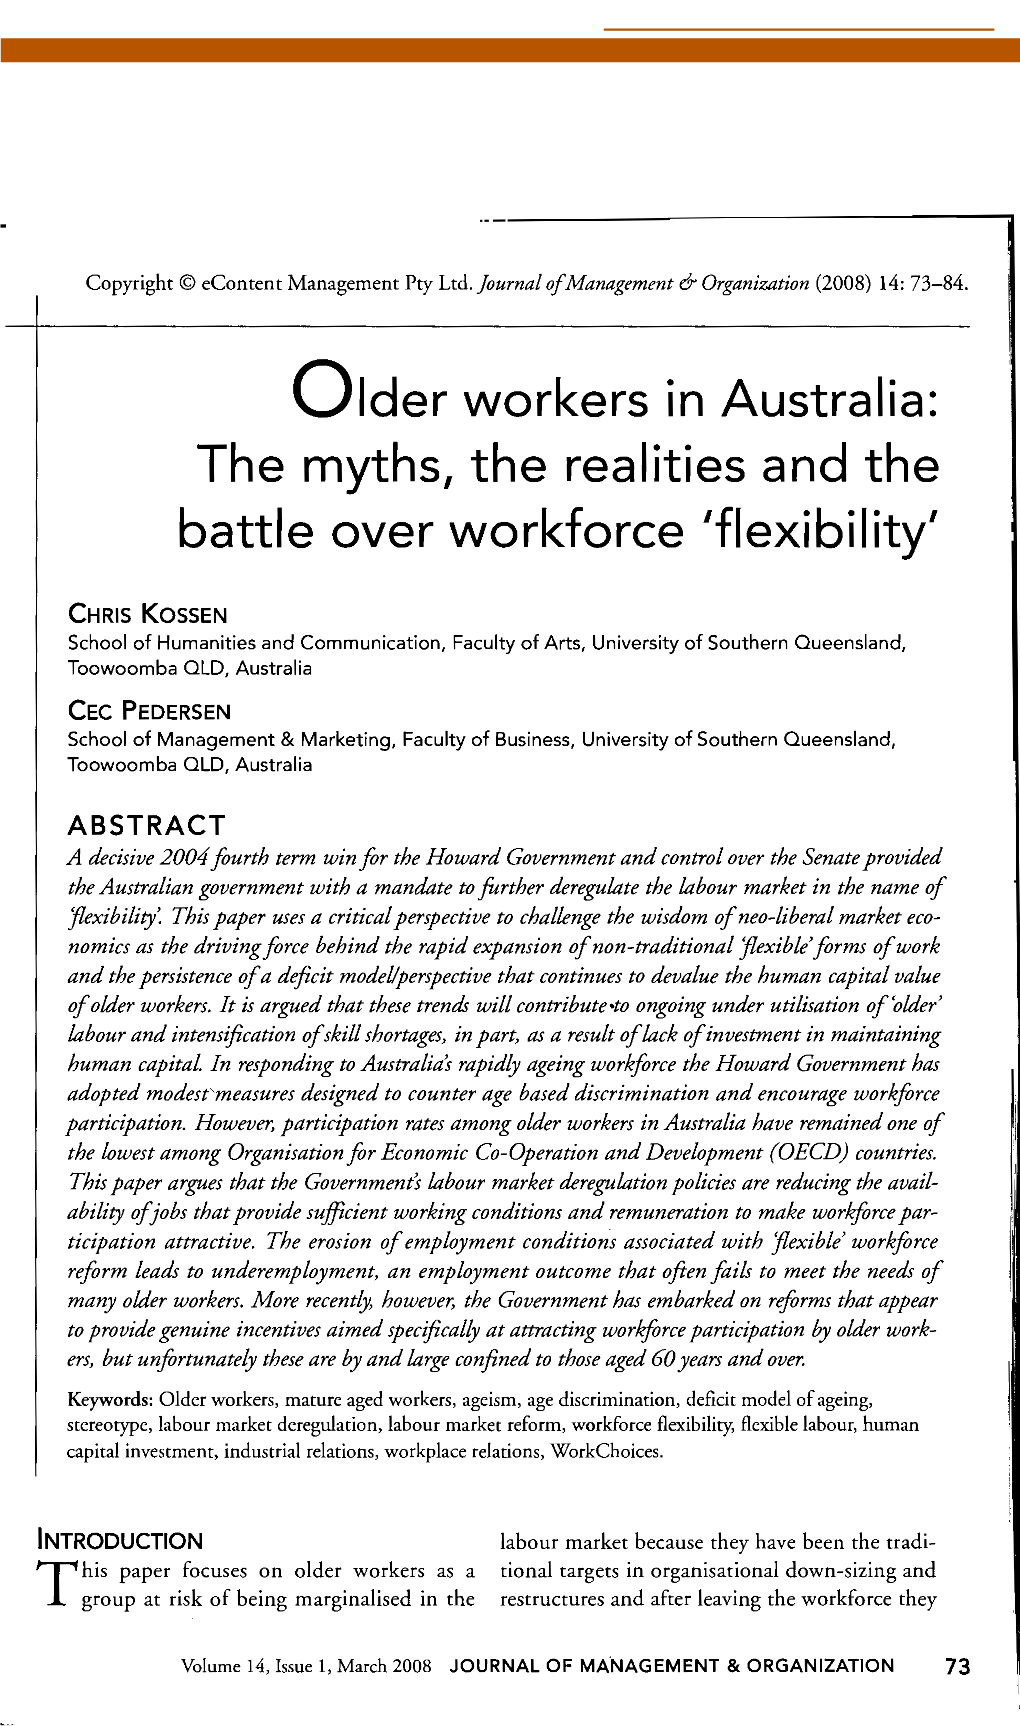 Older Workers in Australia: the Myths, the Realities and the Battle Over Workforce 'Flexibility'